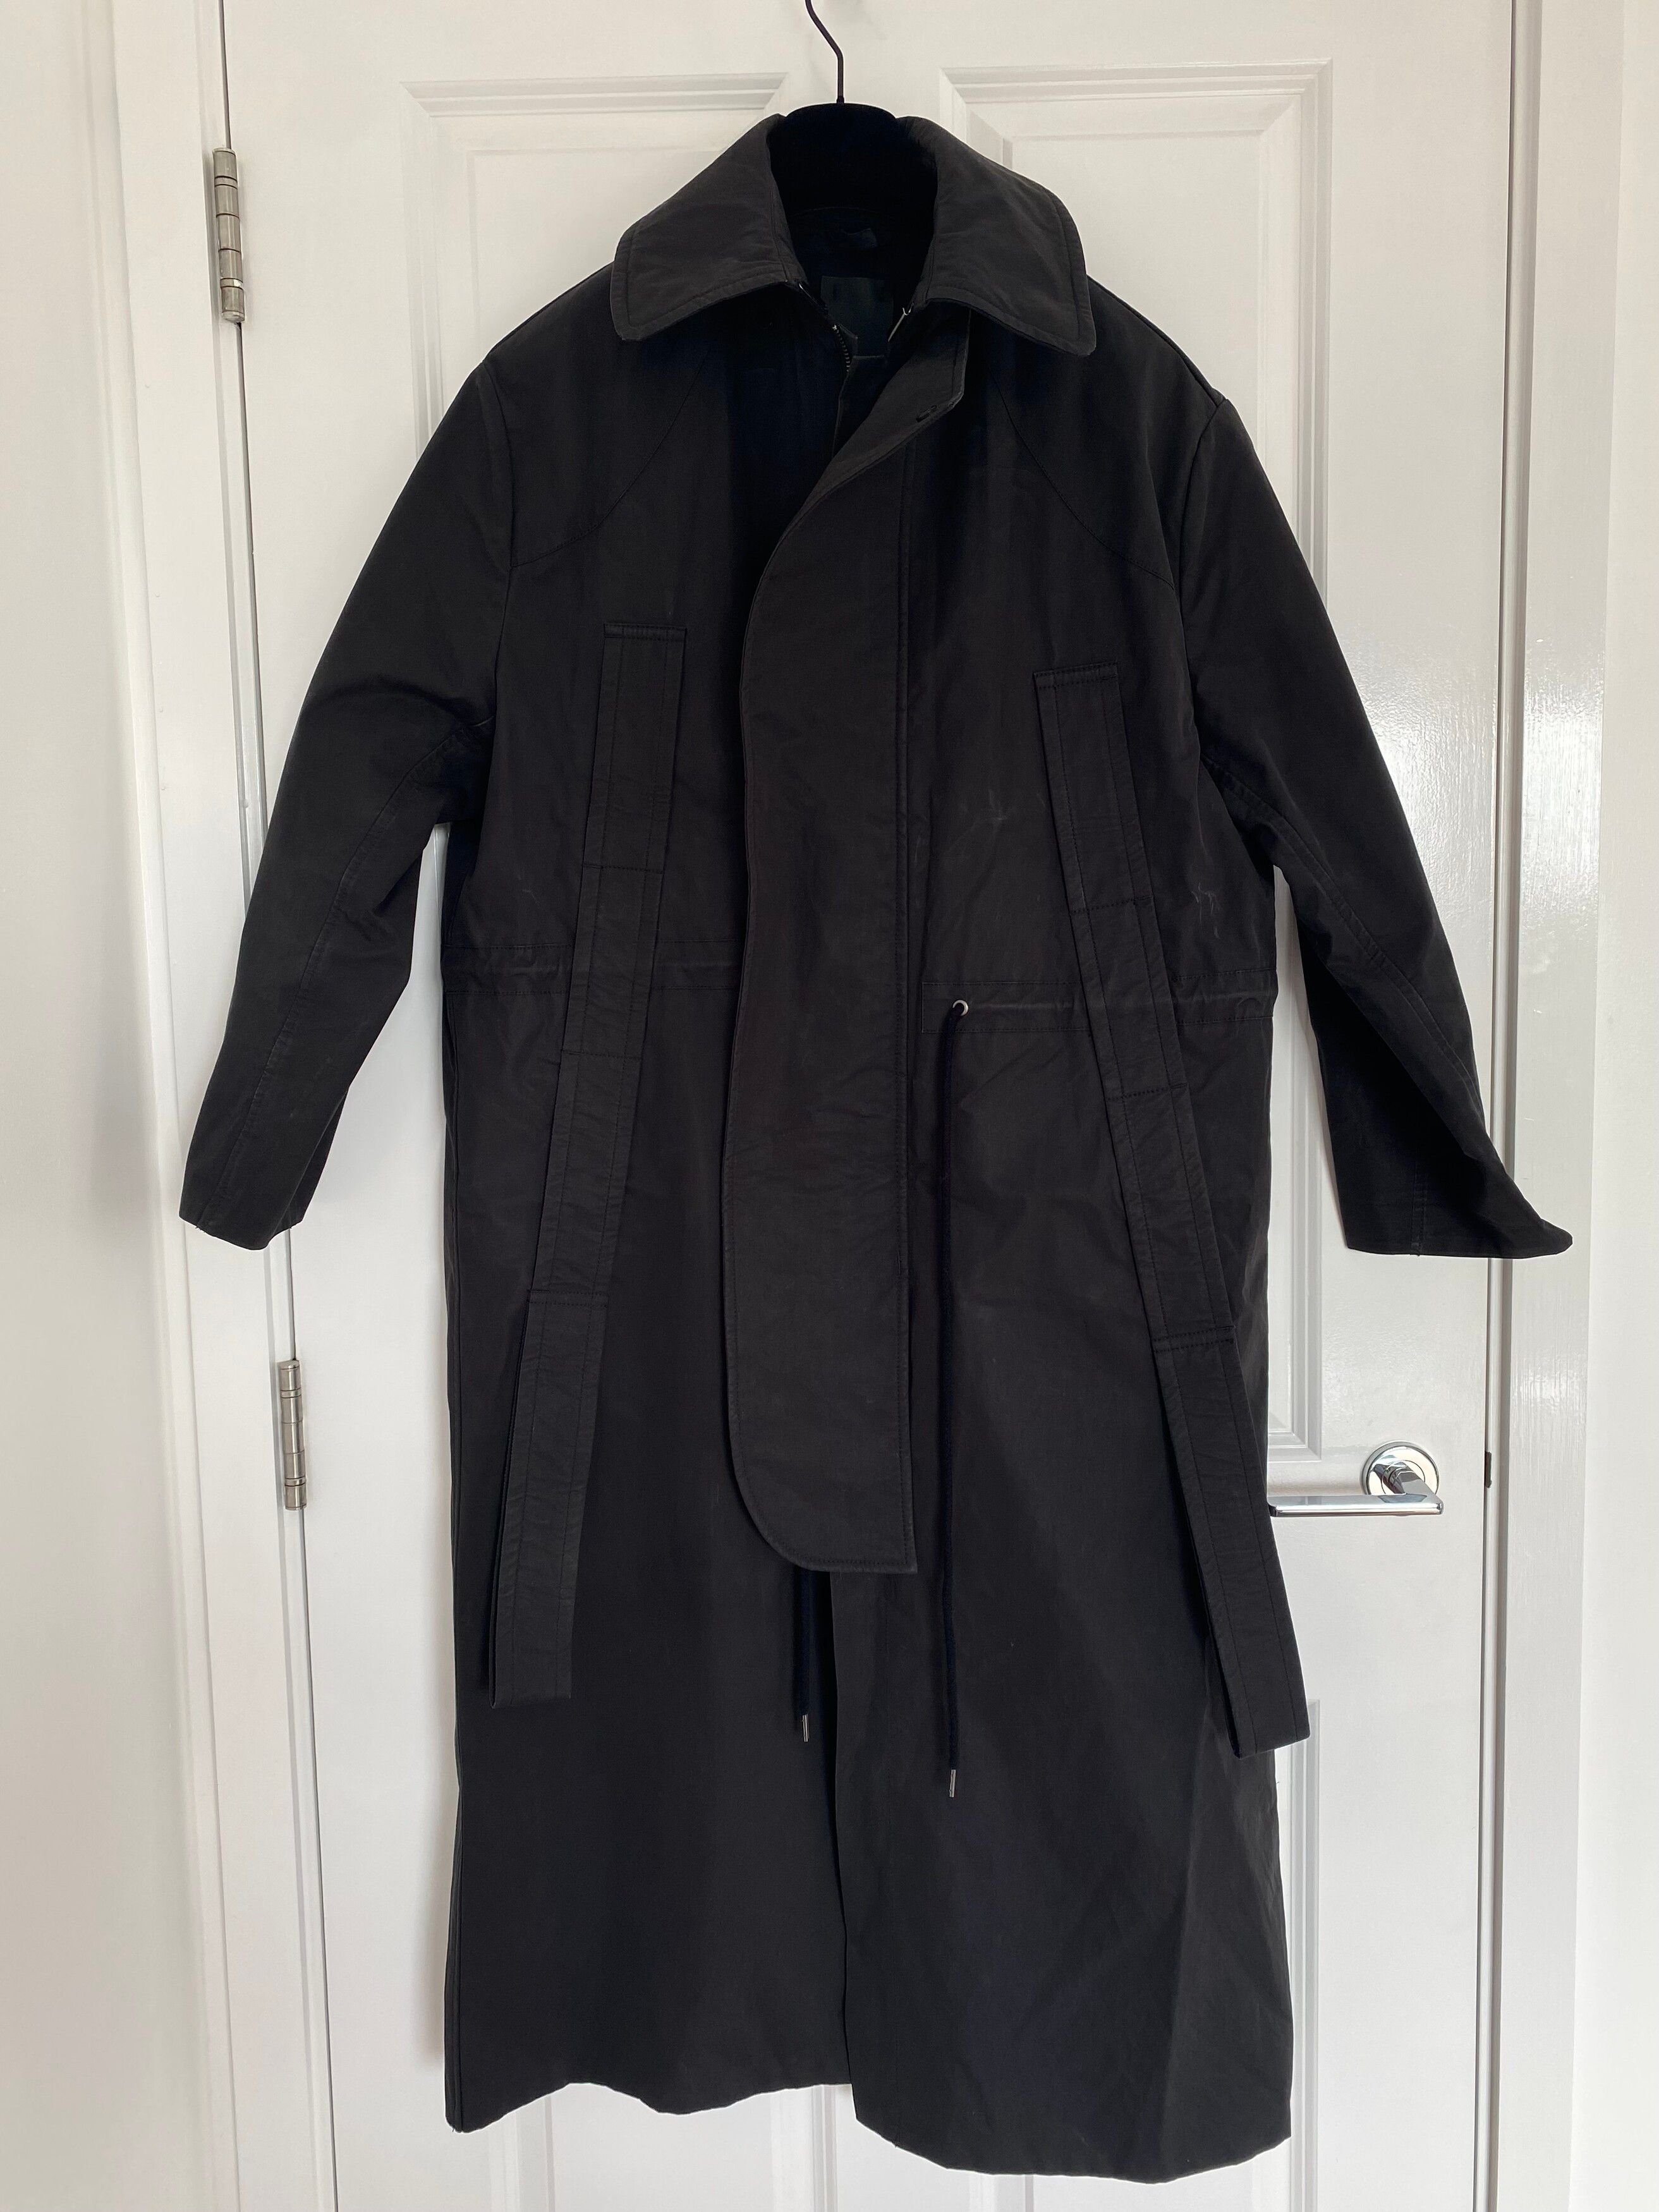 Craig Green Final Price Drop: CG Trenchcoat w/ Straps | Grailed